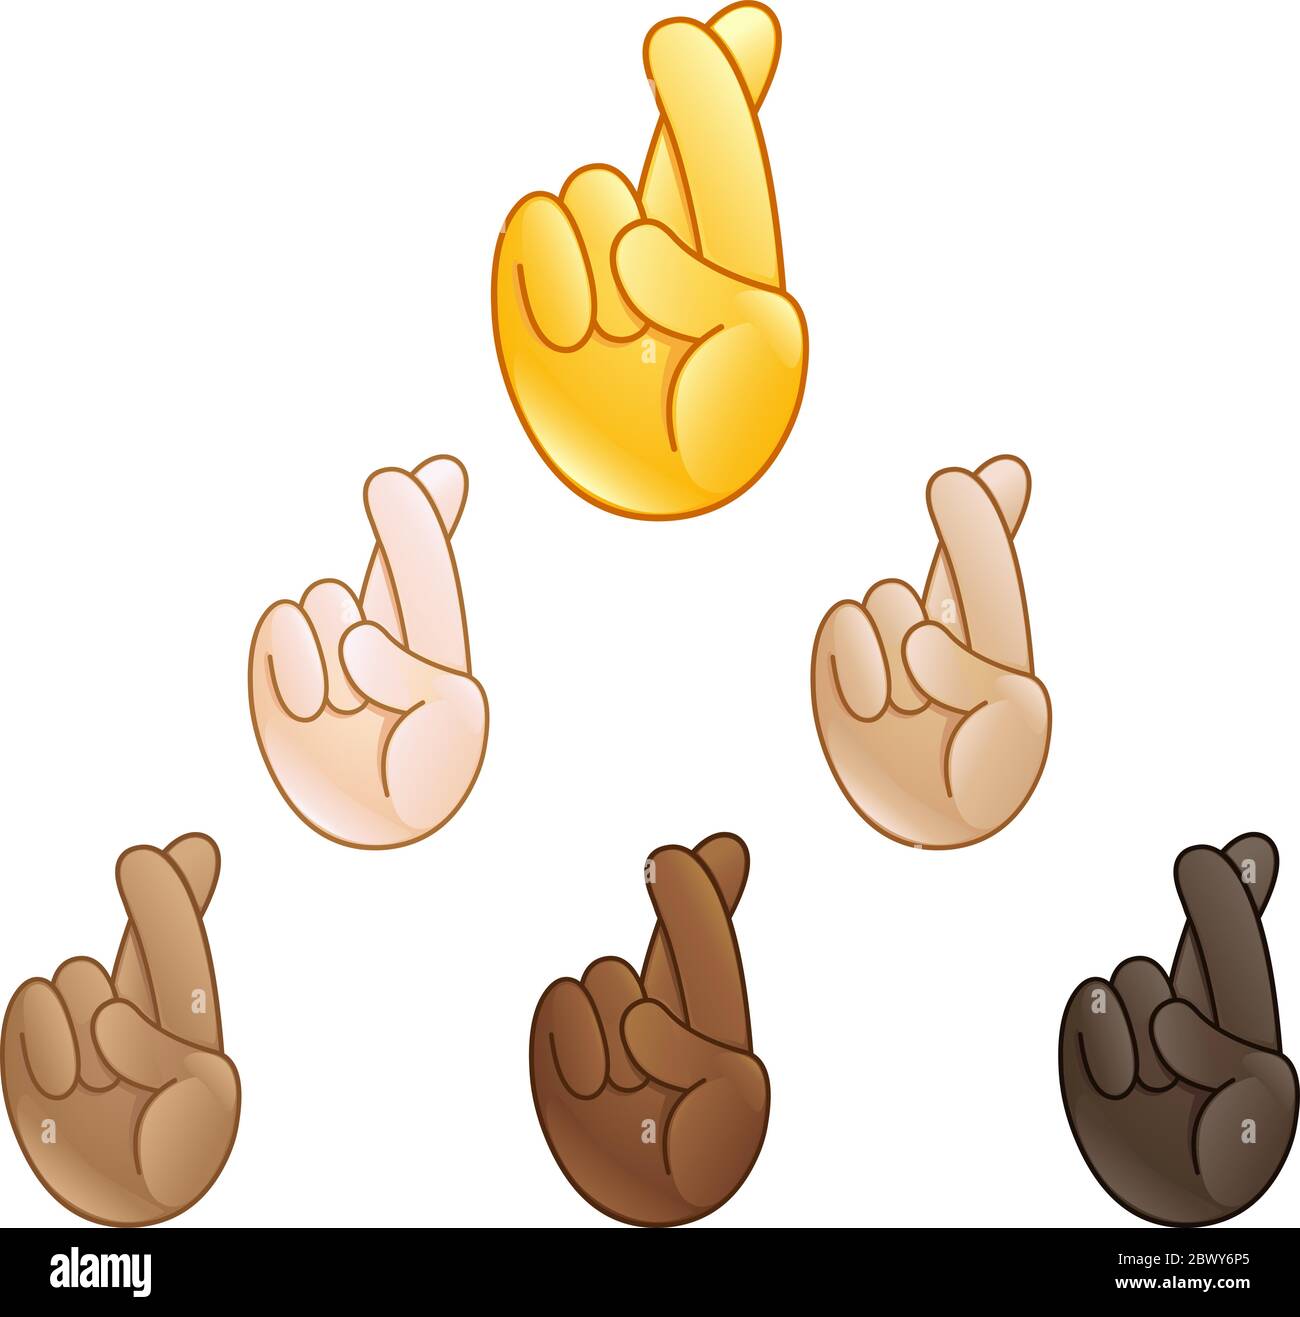 hand with index and middle fingers crossed emoji set of various skin tones Stock Vector